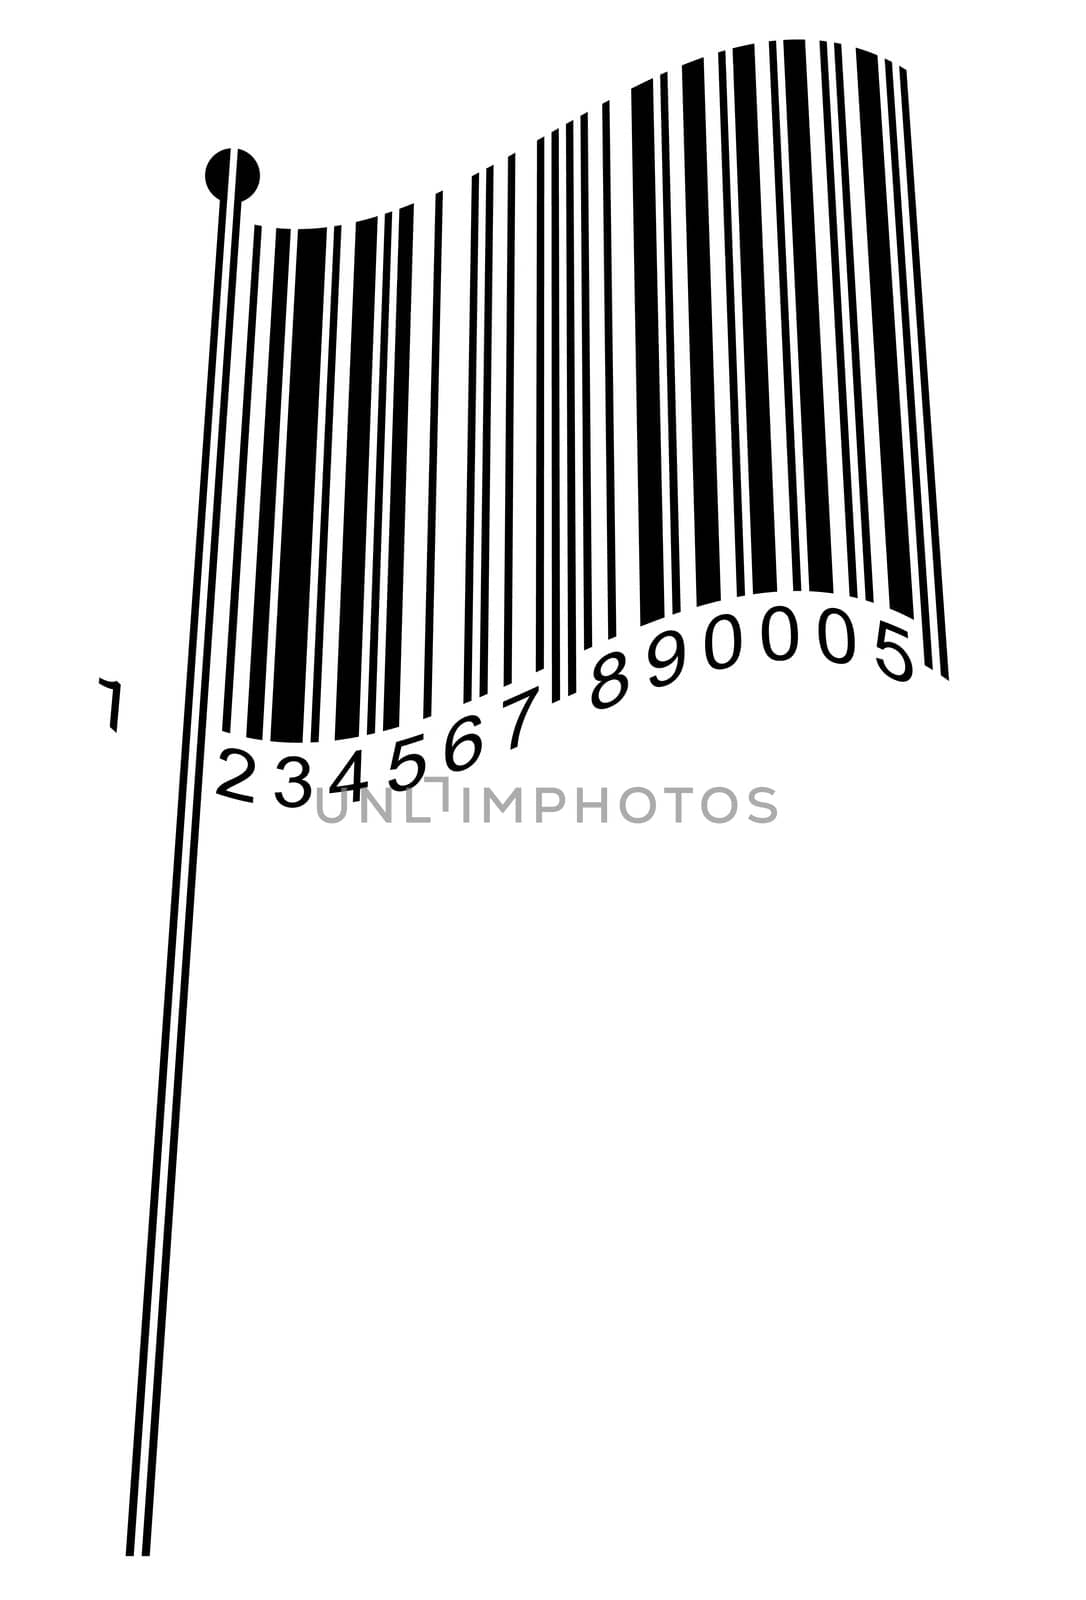 Barcode Flag by faberfoto